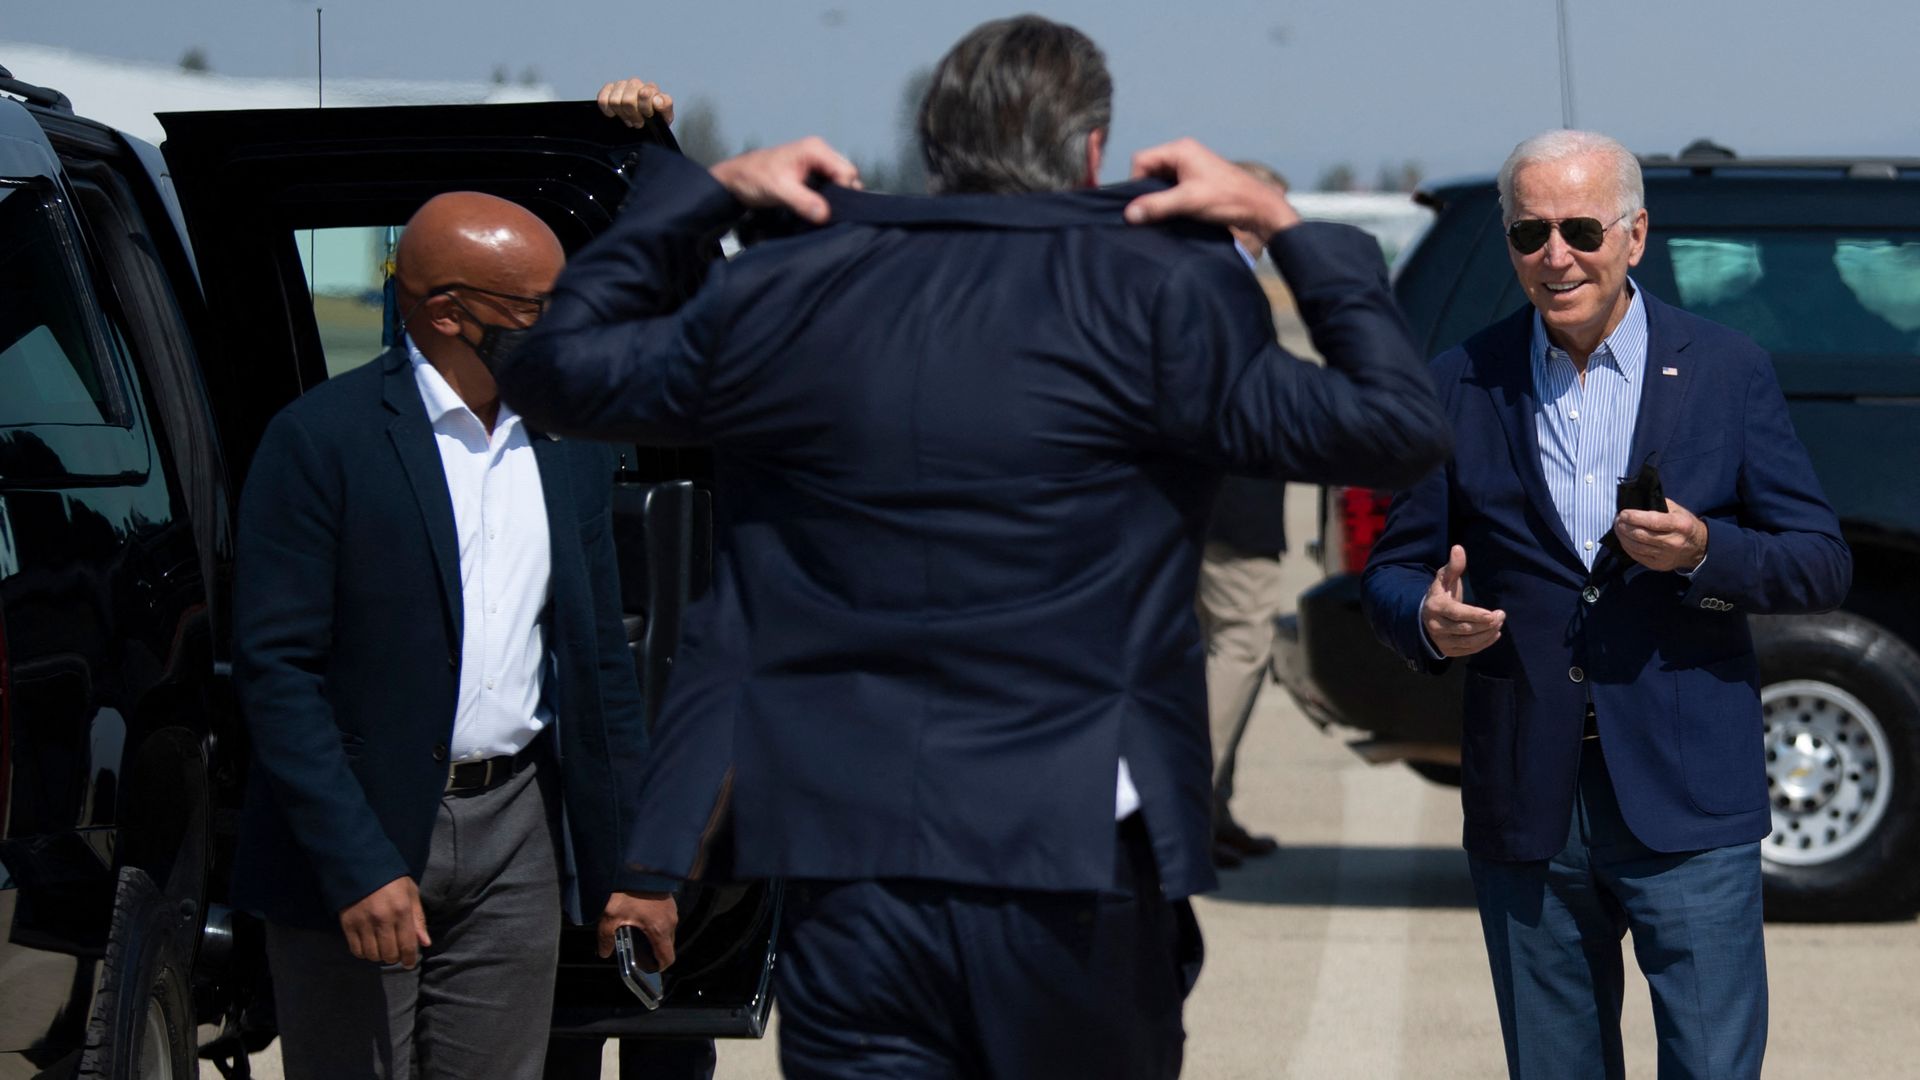 California Gov. Gavin Newsom is seen donning his sport jacket as President Biden arrives for a campaign stop.